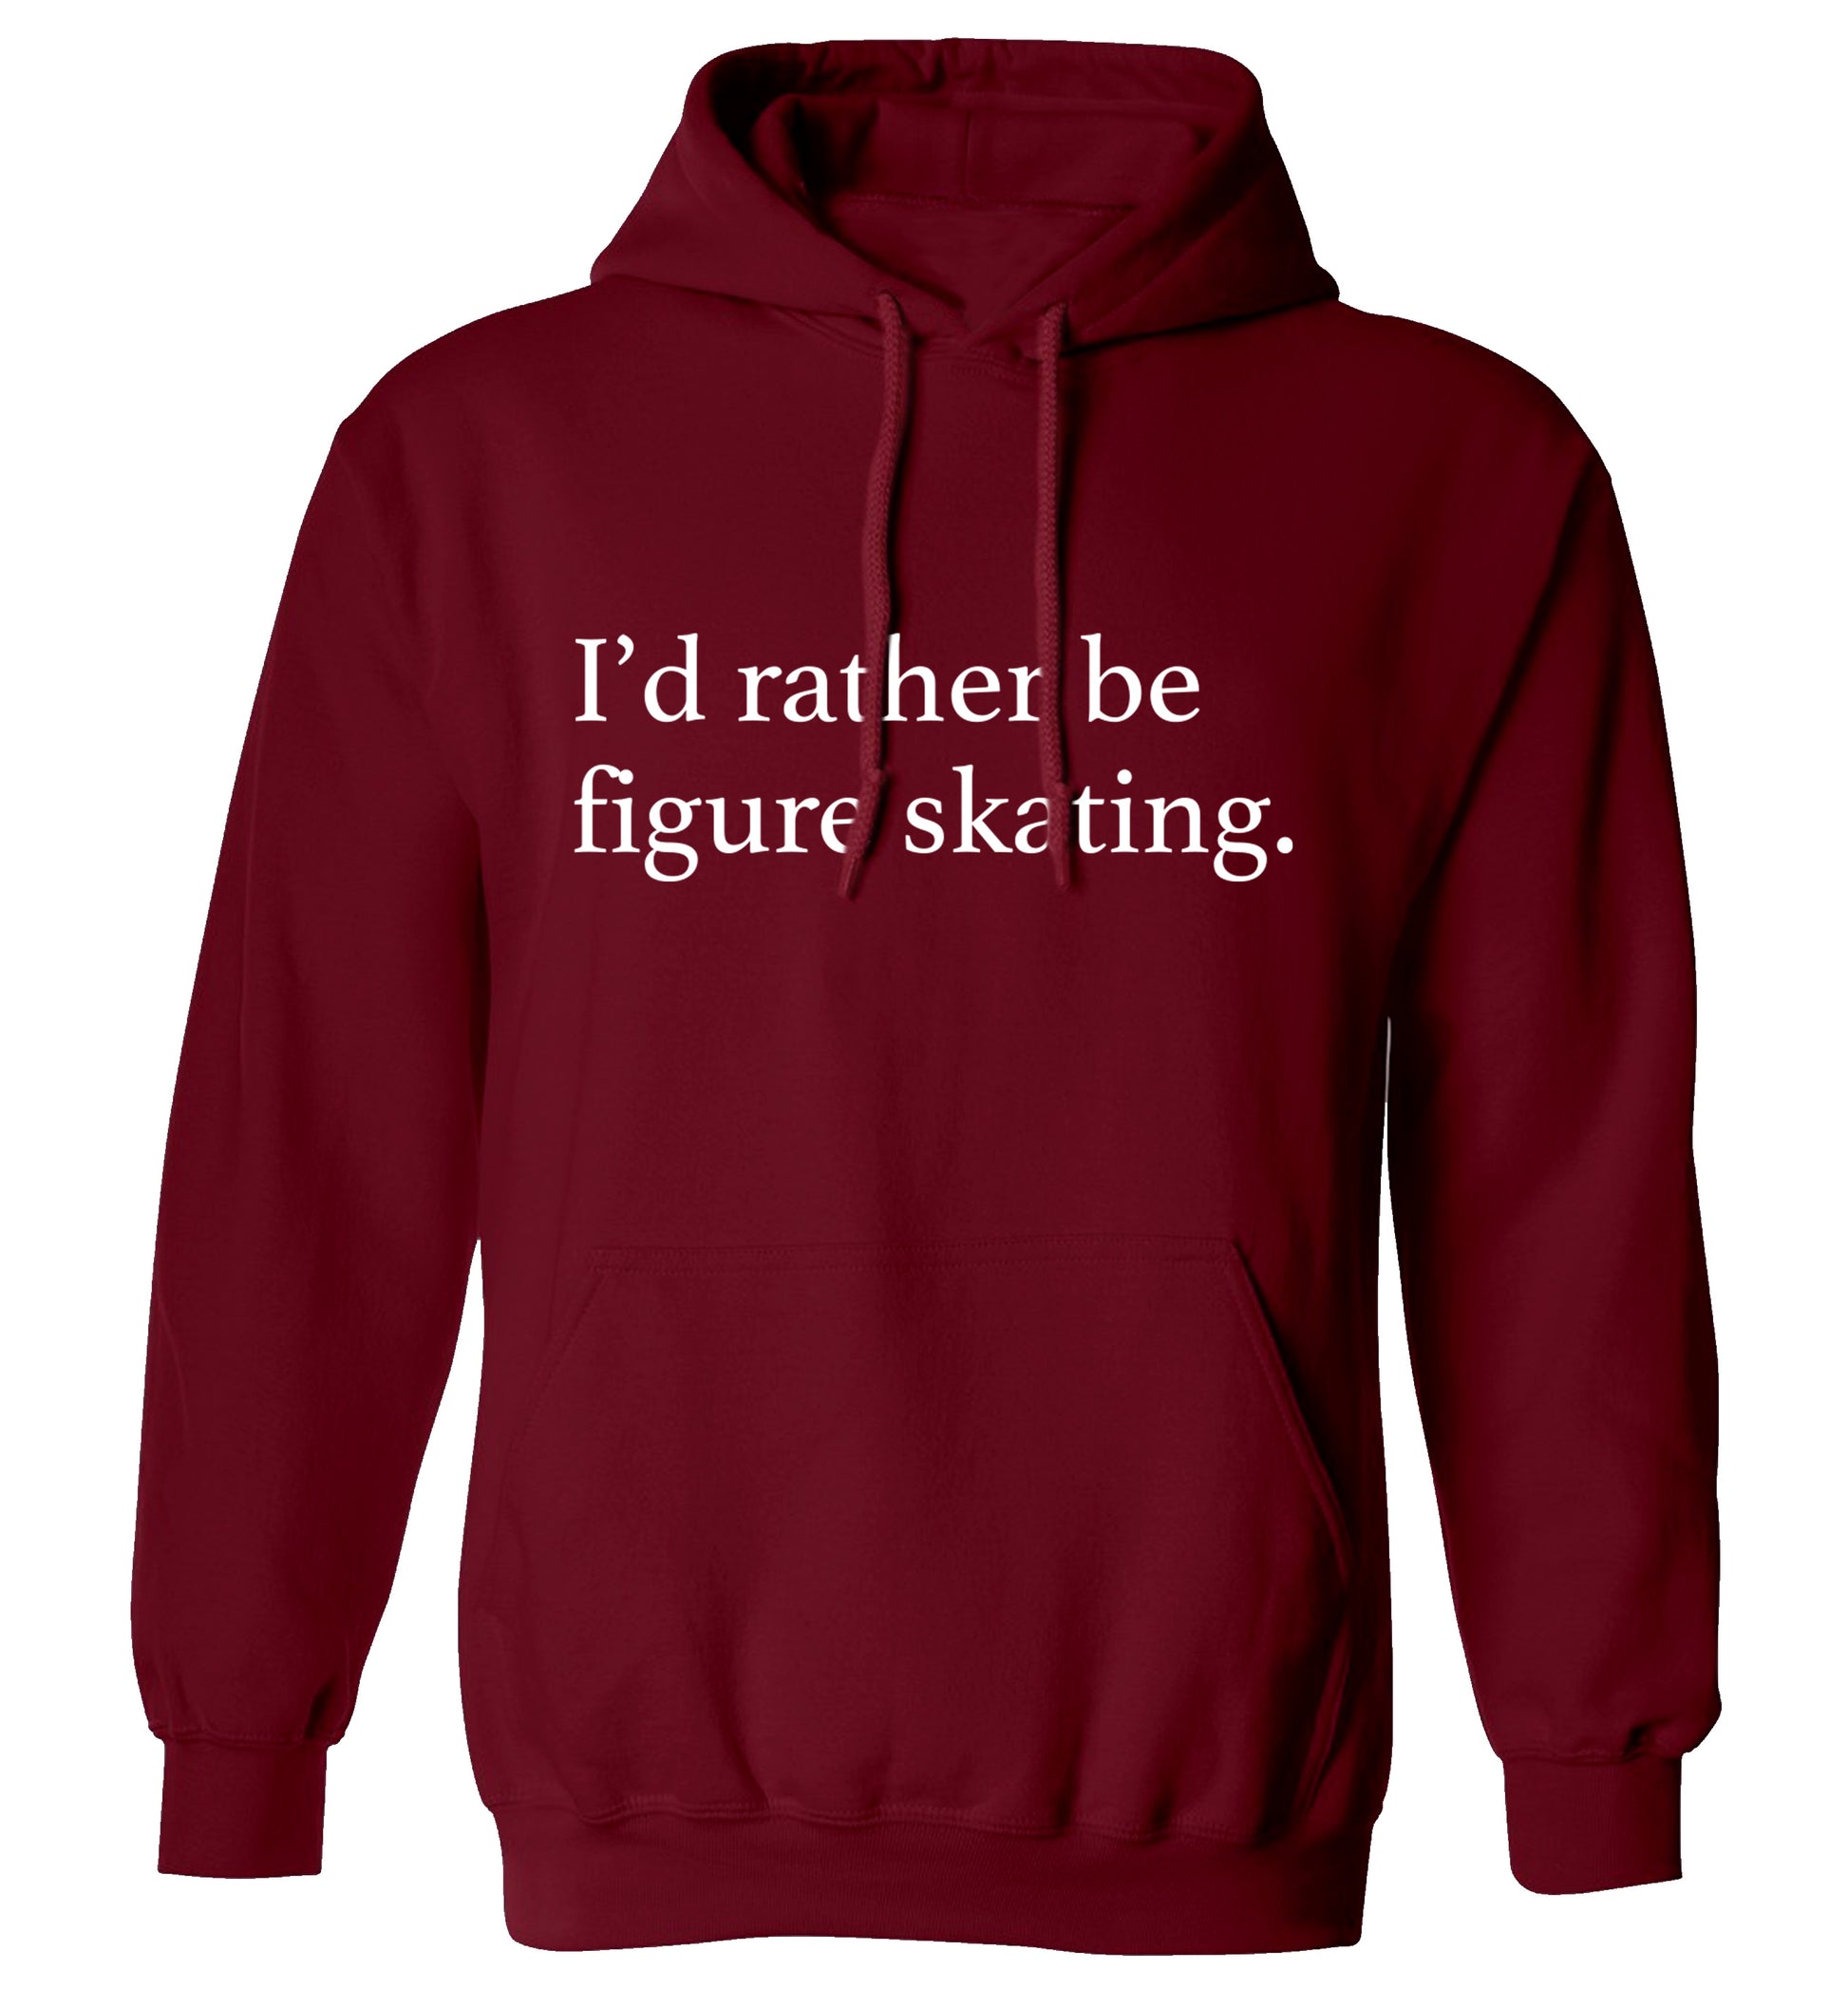 I'd rather be figure skating adults unisexmaroon hoodie 2XL